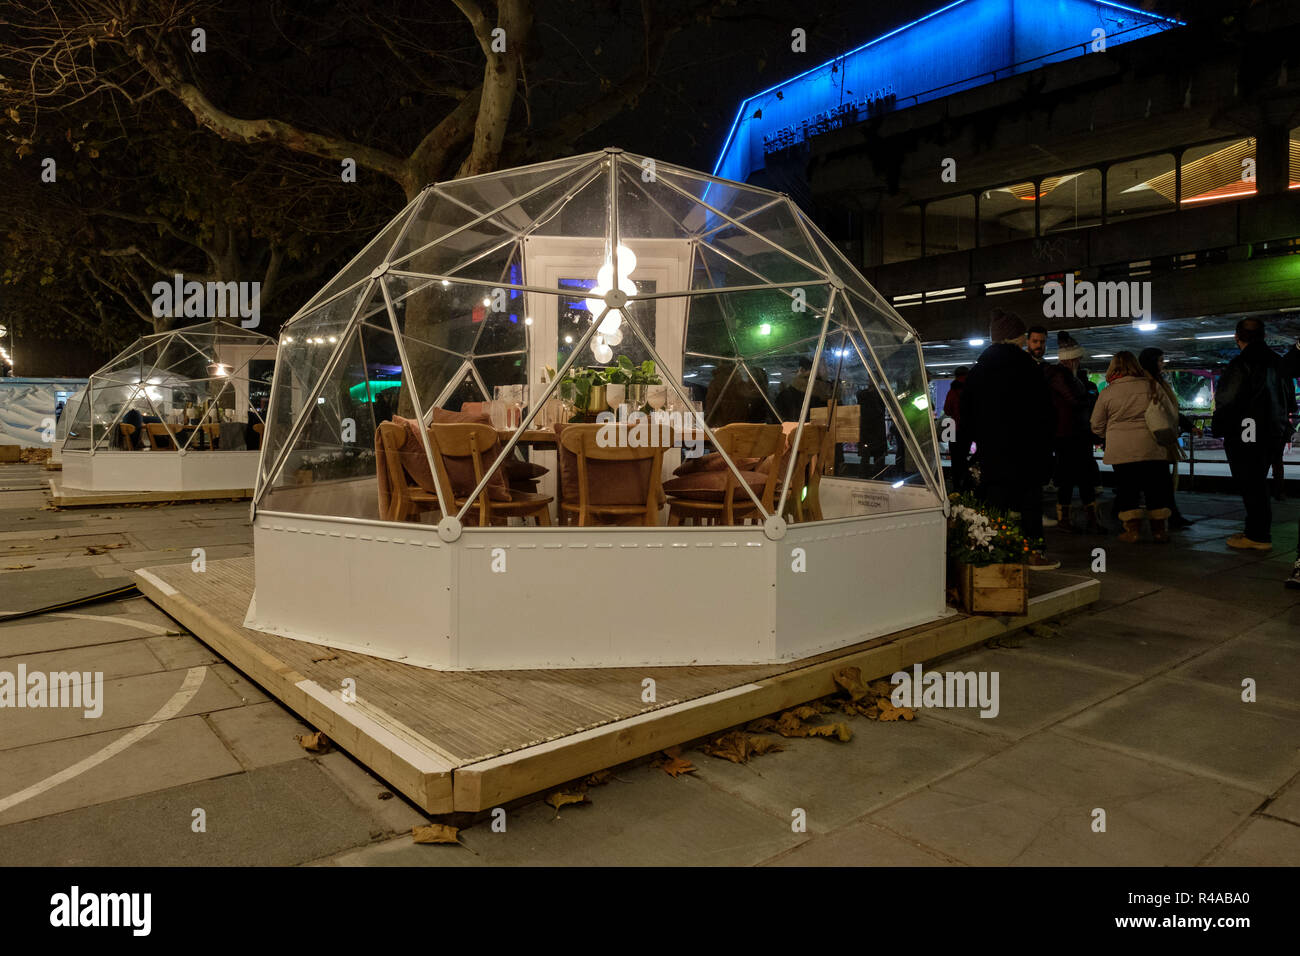 Pop-up private dining 'pods' / Igloos in front of the Queen Elizabeth Hall, South Bank, London, England Stock Photo